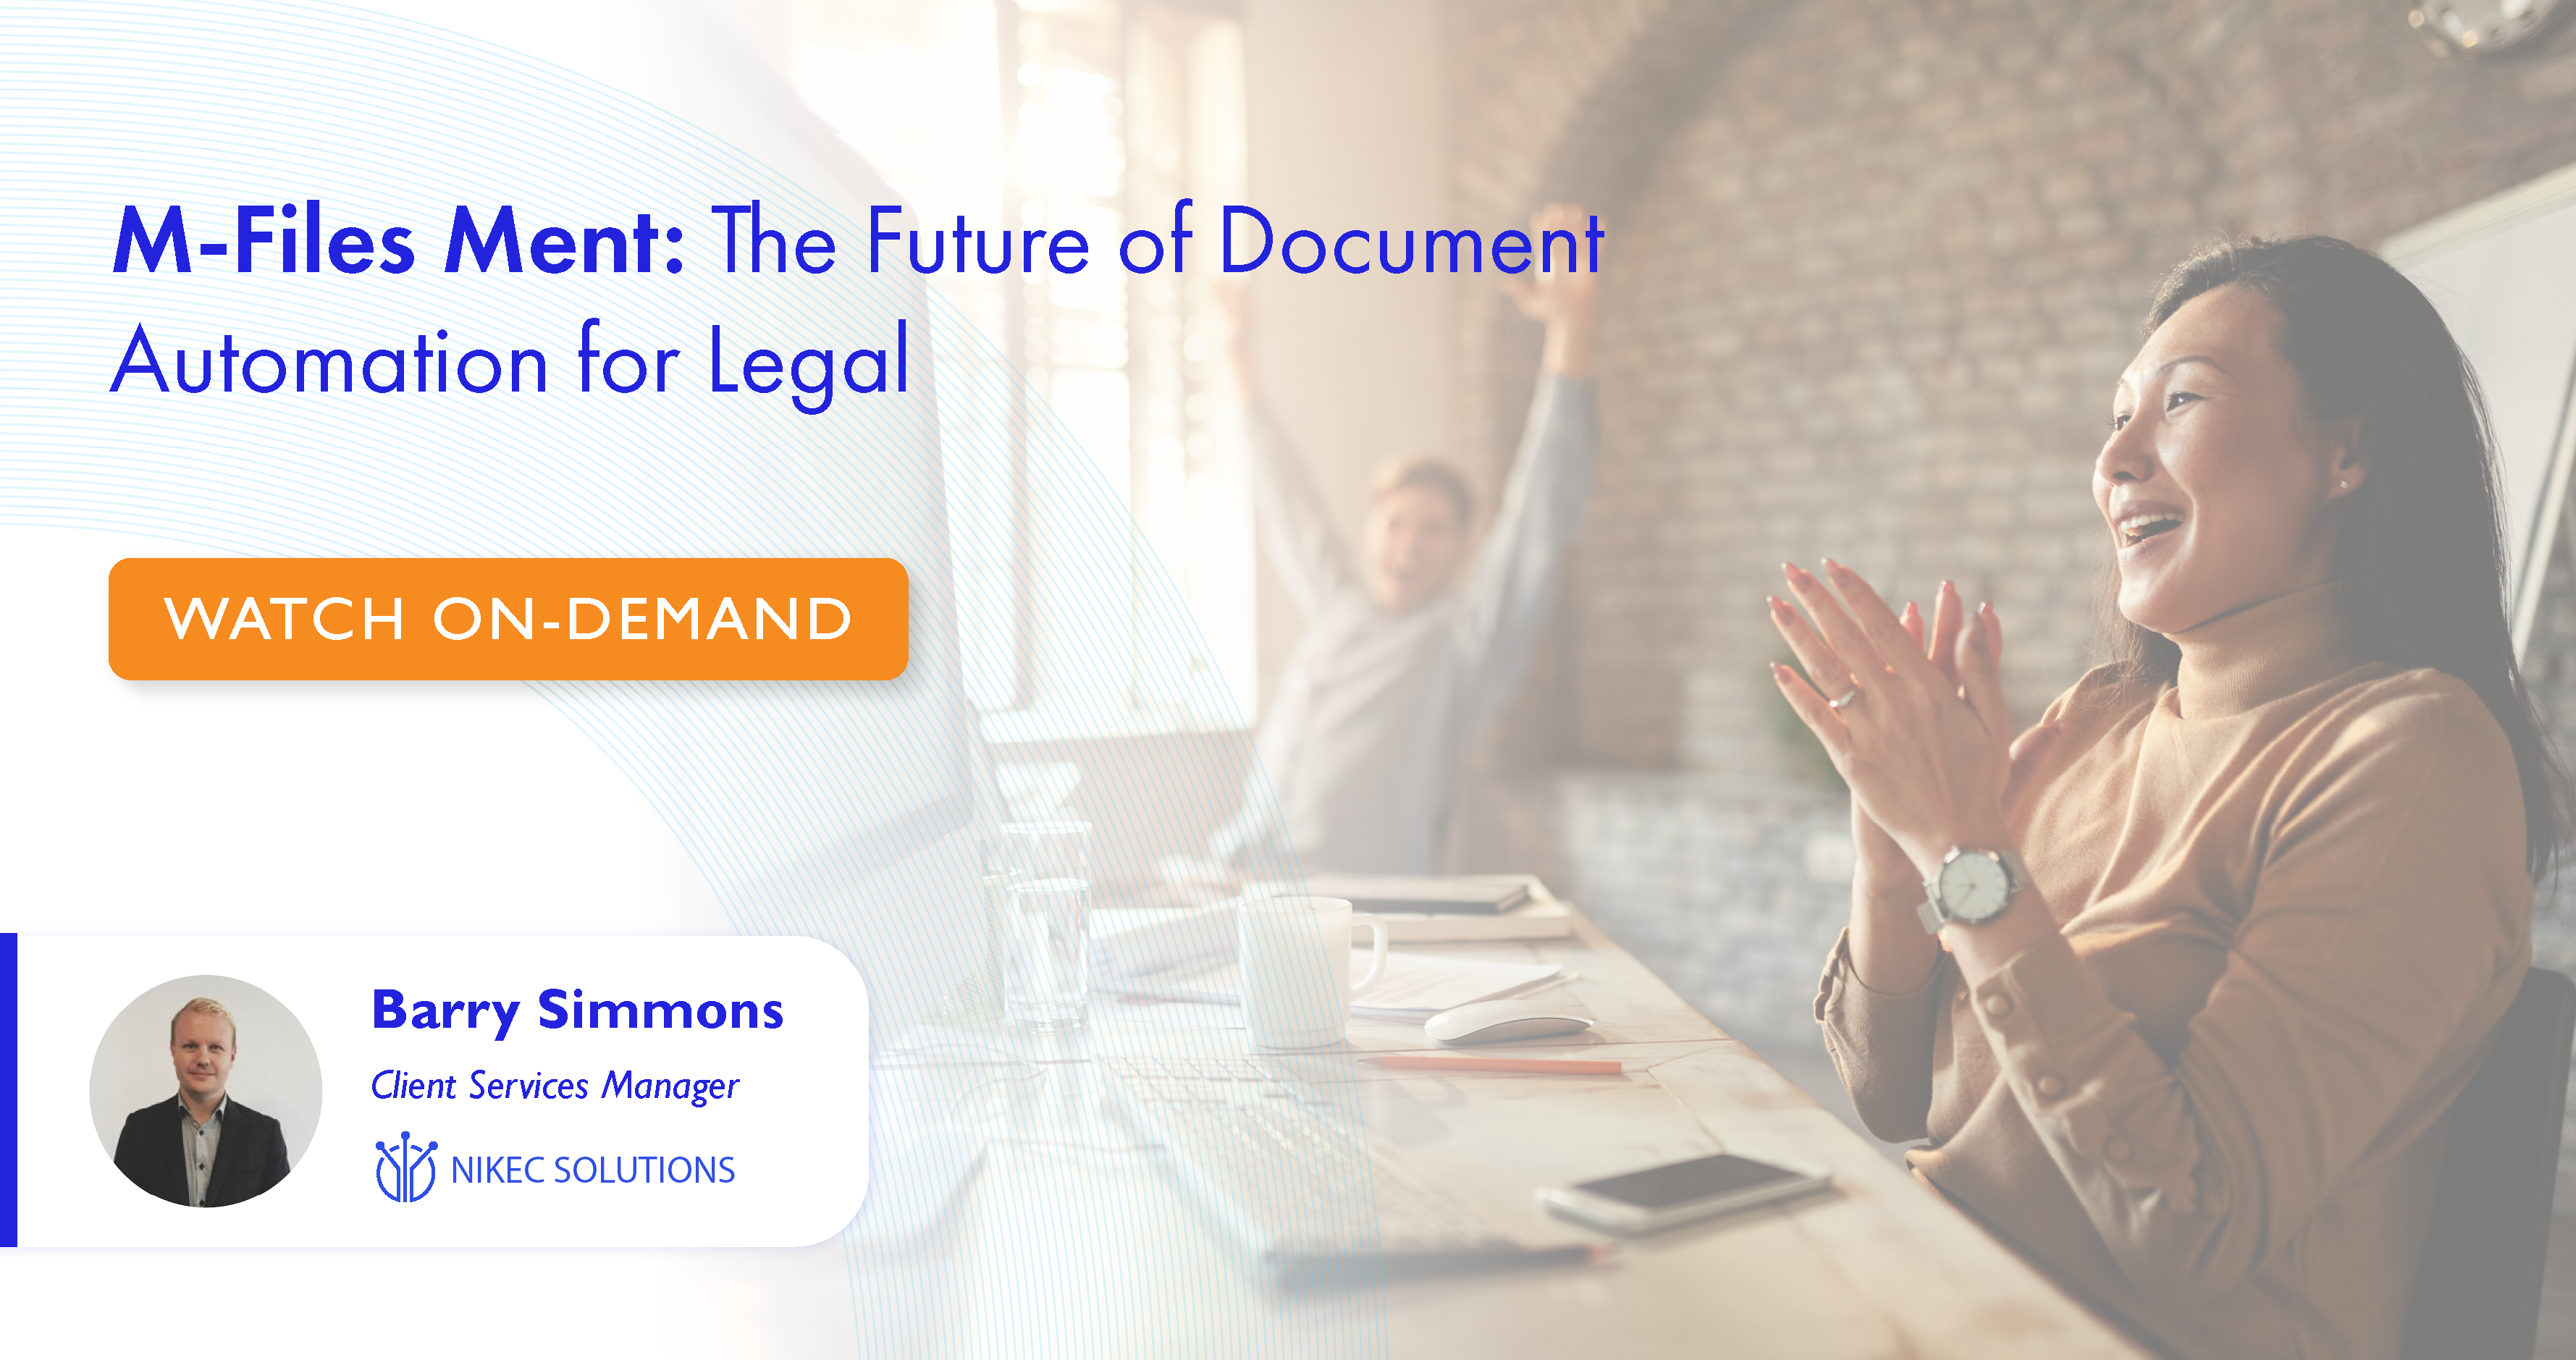 Are you ready to transform your legal document automation processes? Discover the power of M-Files Ment, Legal Document Automation.